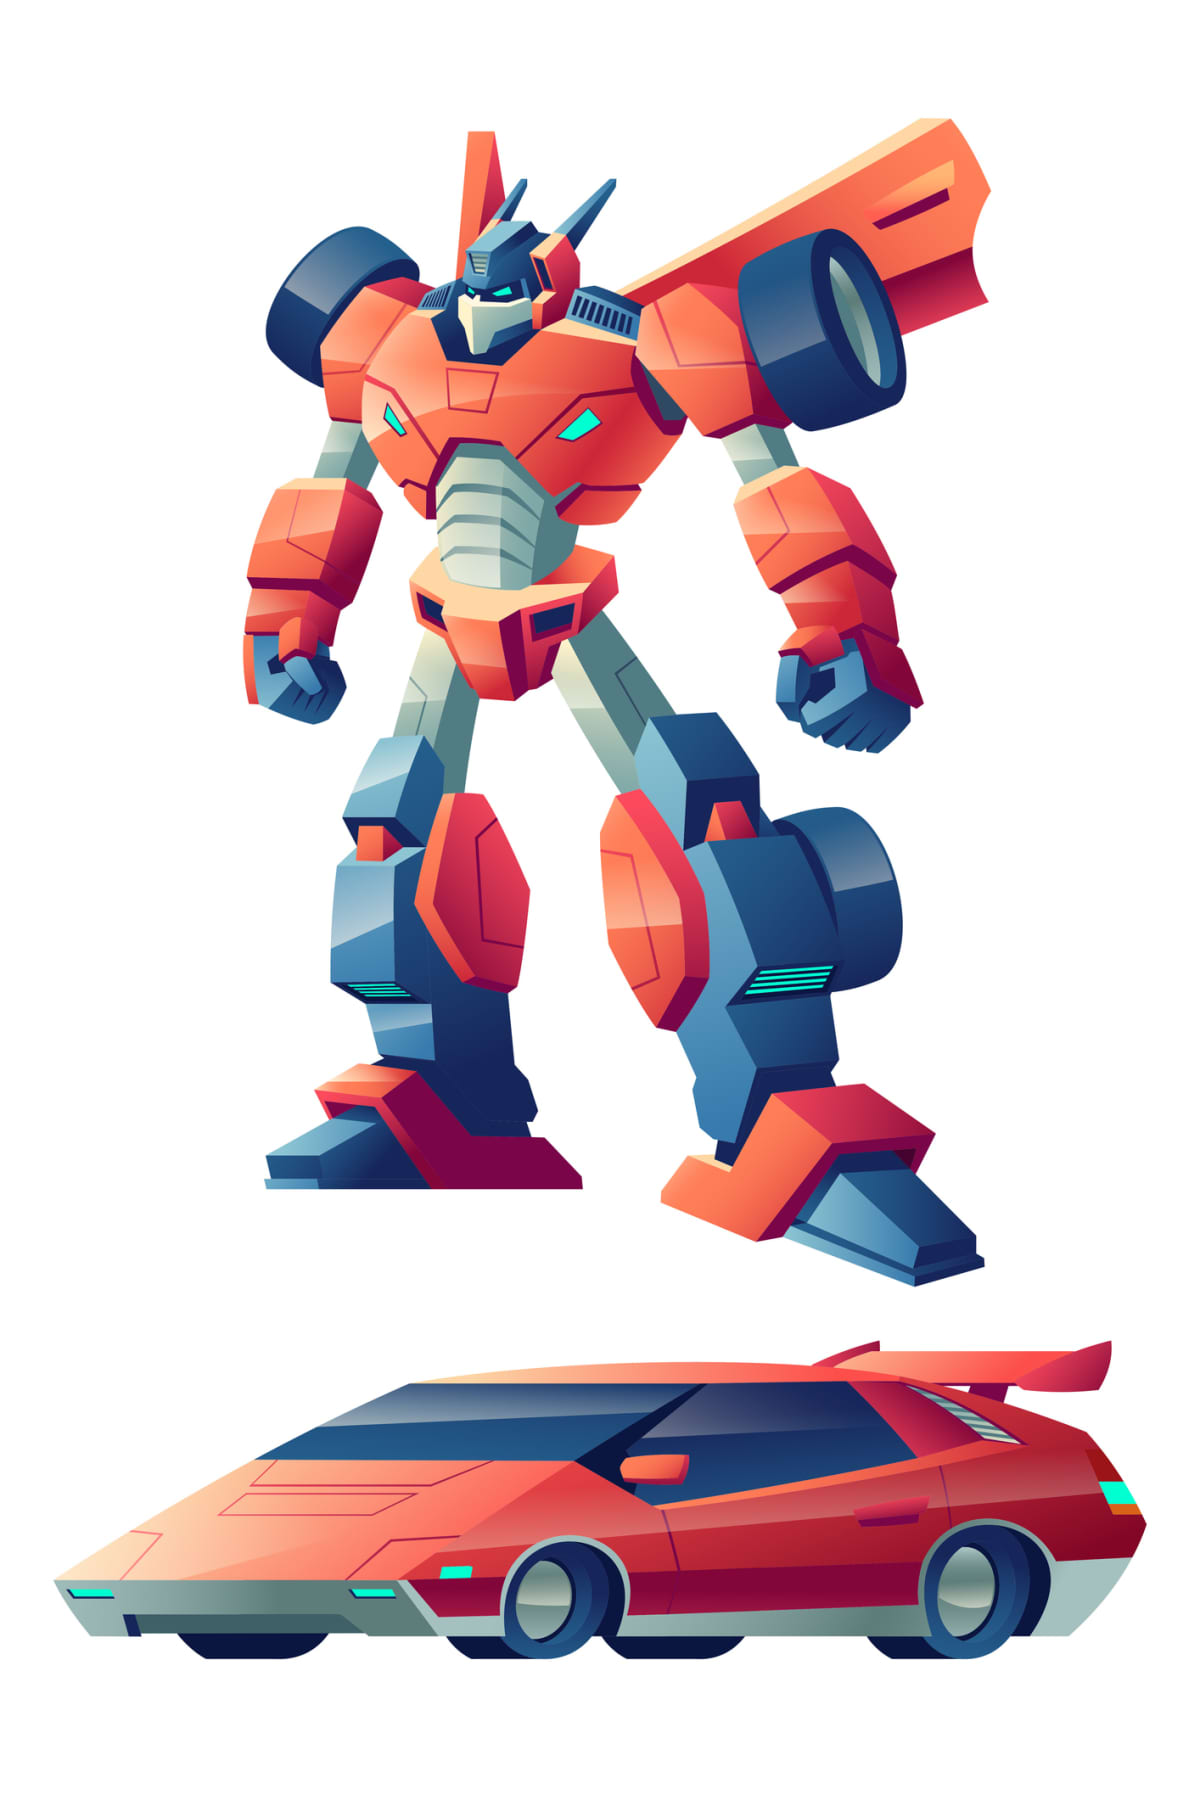 An illustration of the popular toy and animated character Optimus Prime from the "Transformers" franchise.